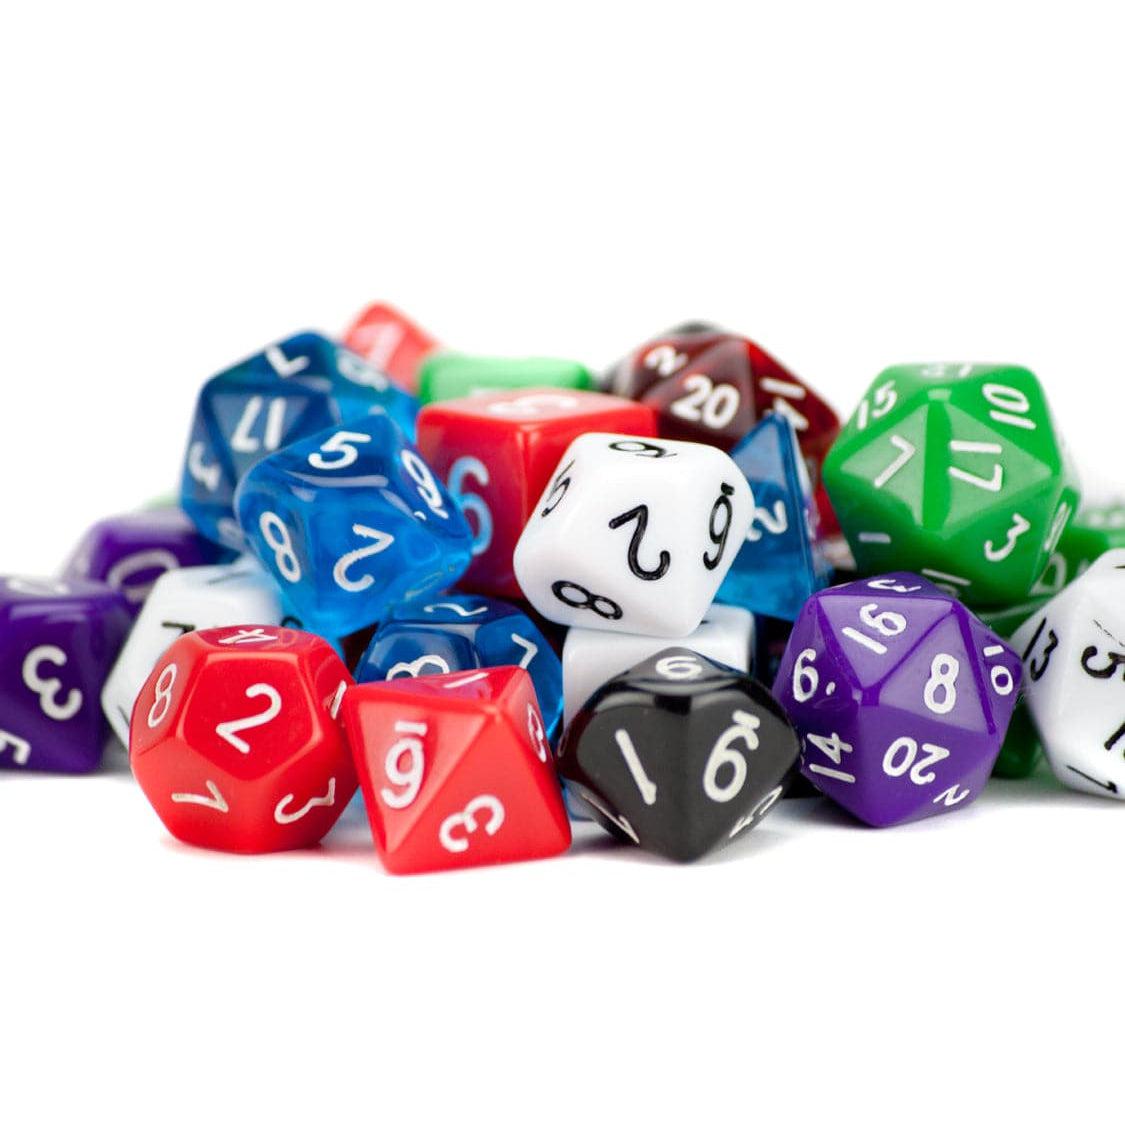 Legacy Dice-100+ Pack of Random D20 Polyhedral Dice in Multiple Color-GDN4006-Legacy Toys